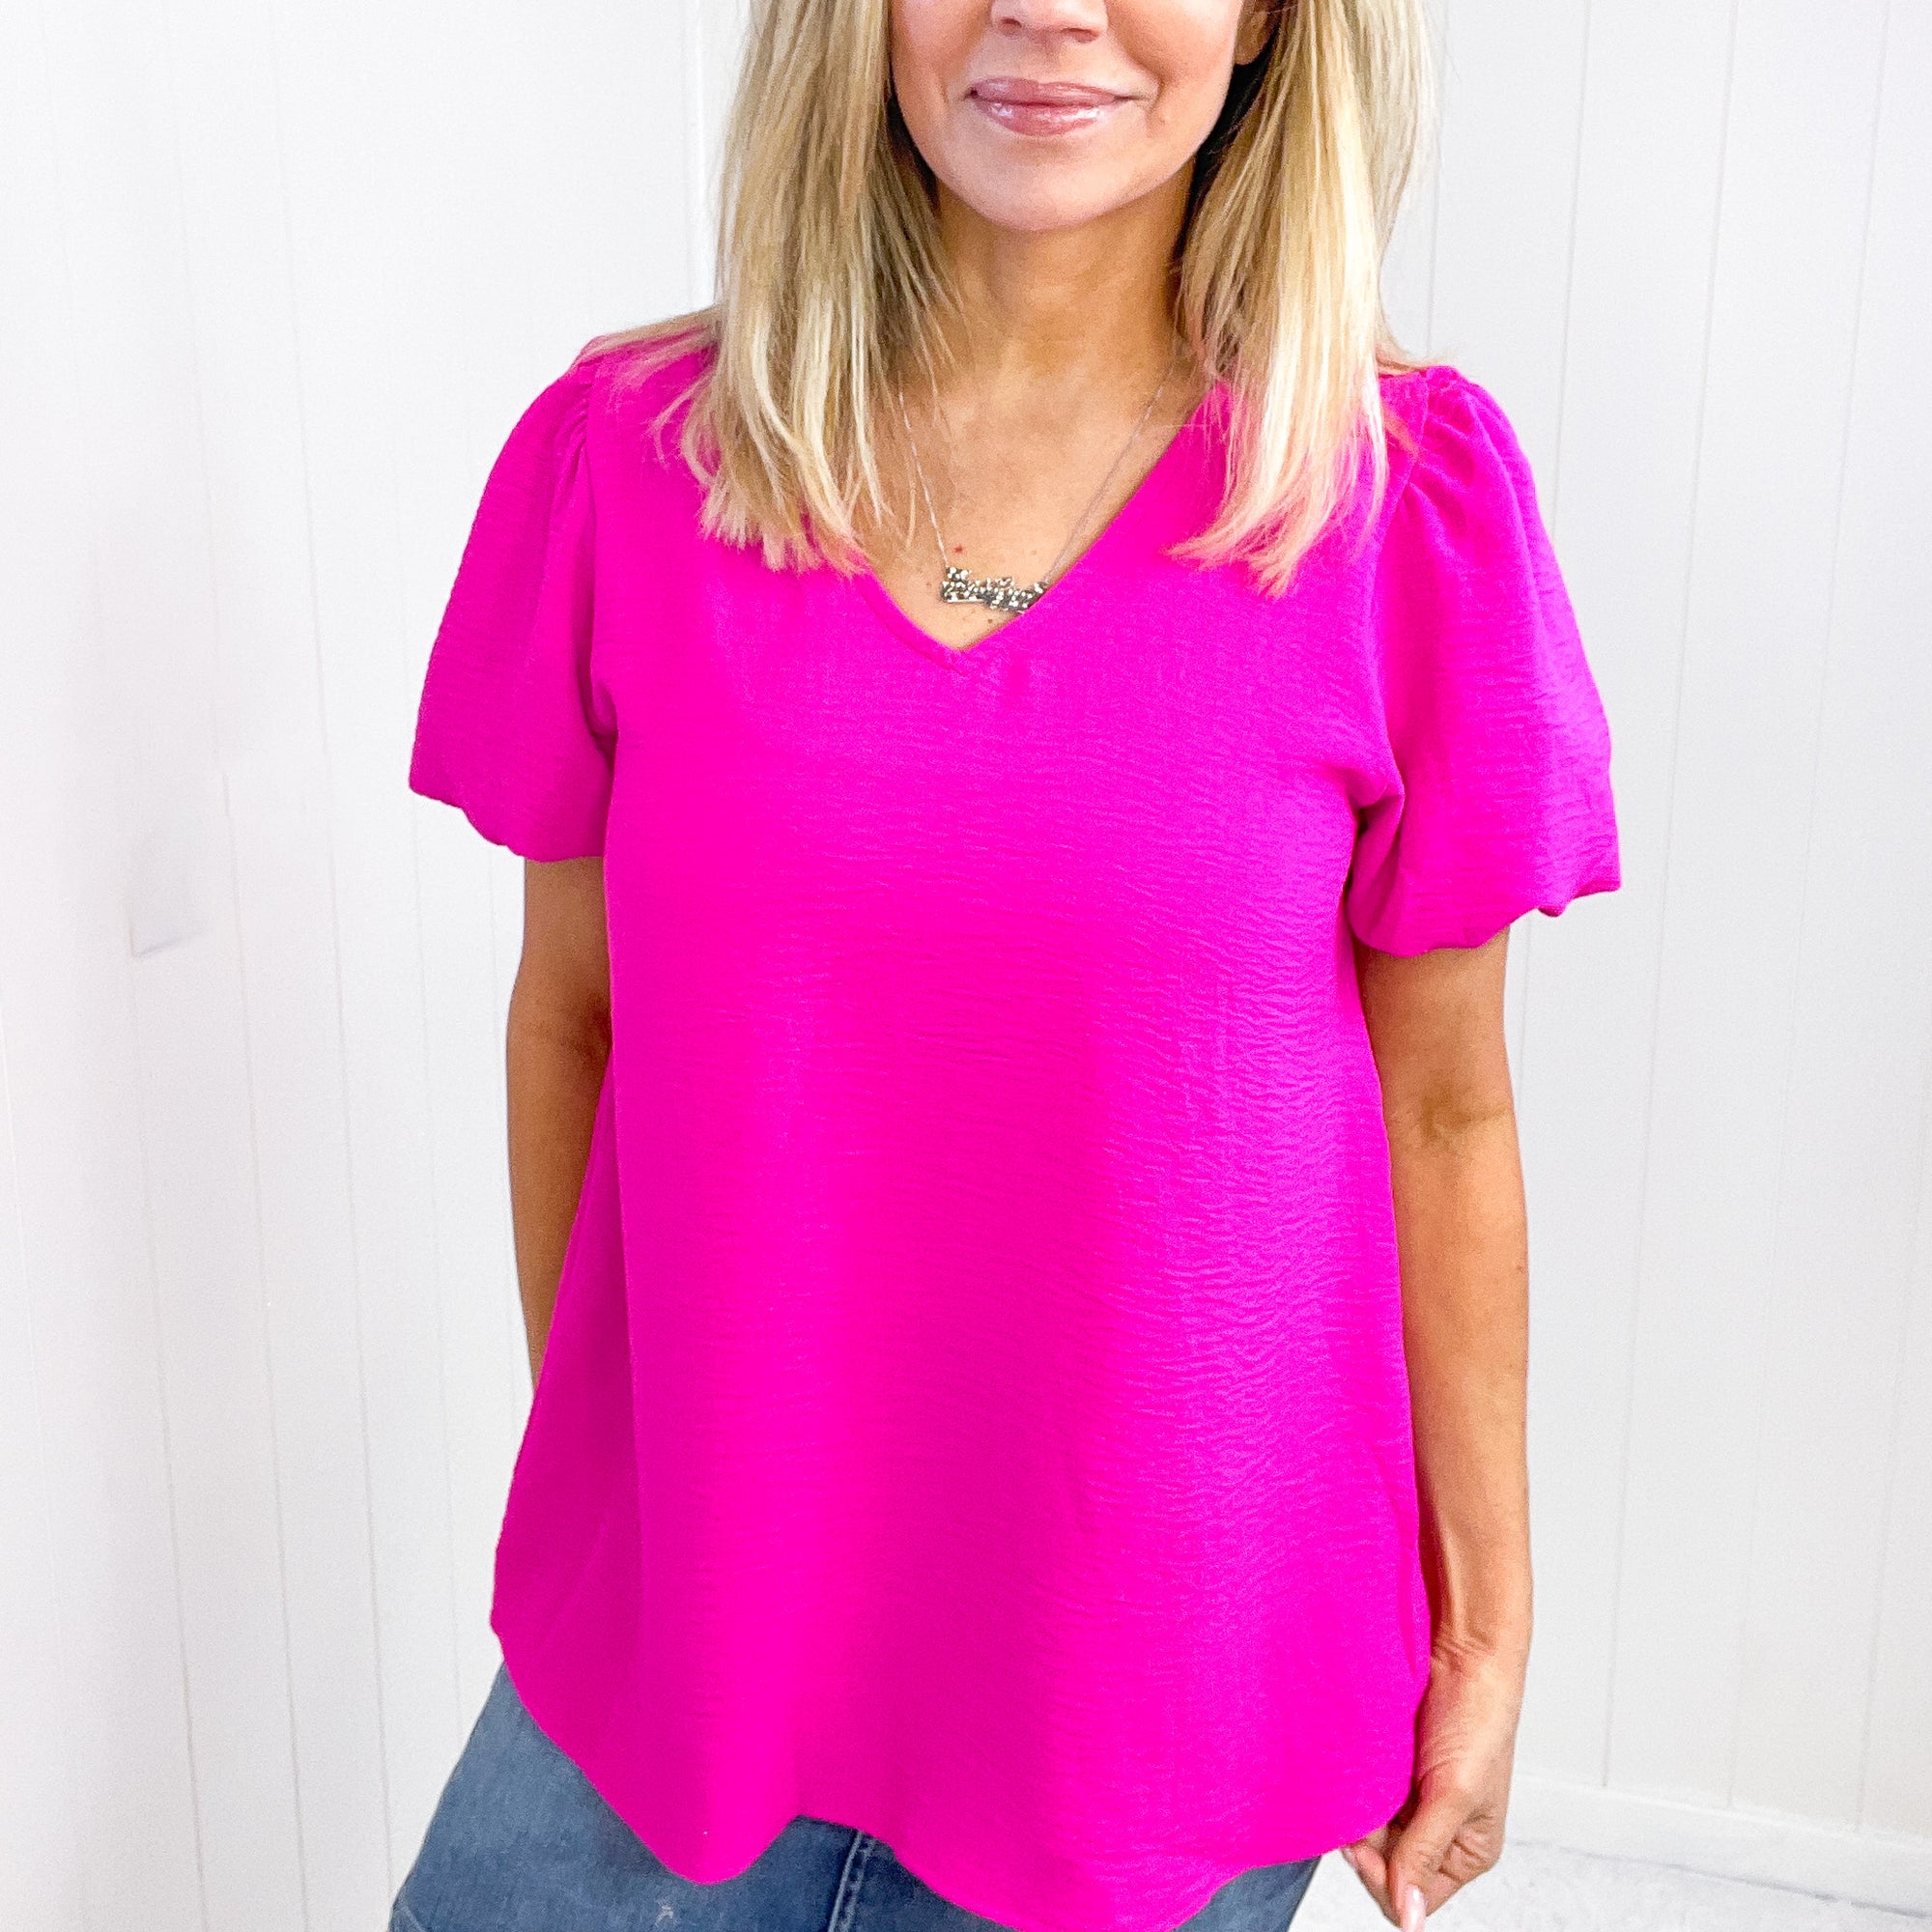 Hot Pink Belong Together Puff Sleeve Blouse - Boujee Boutique 